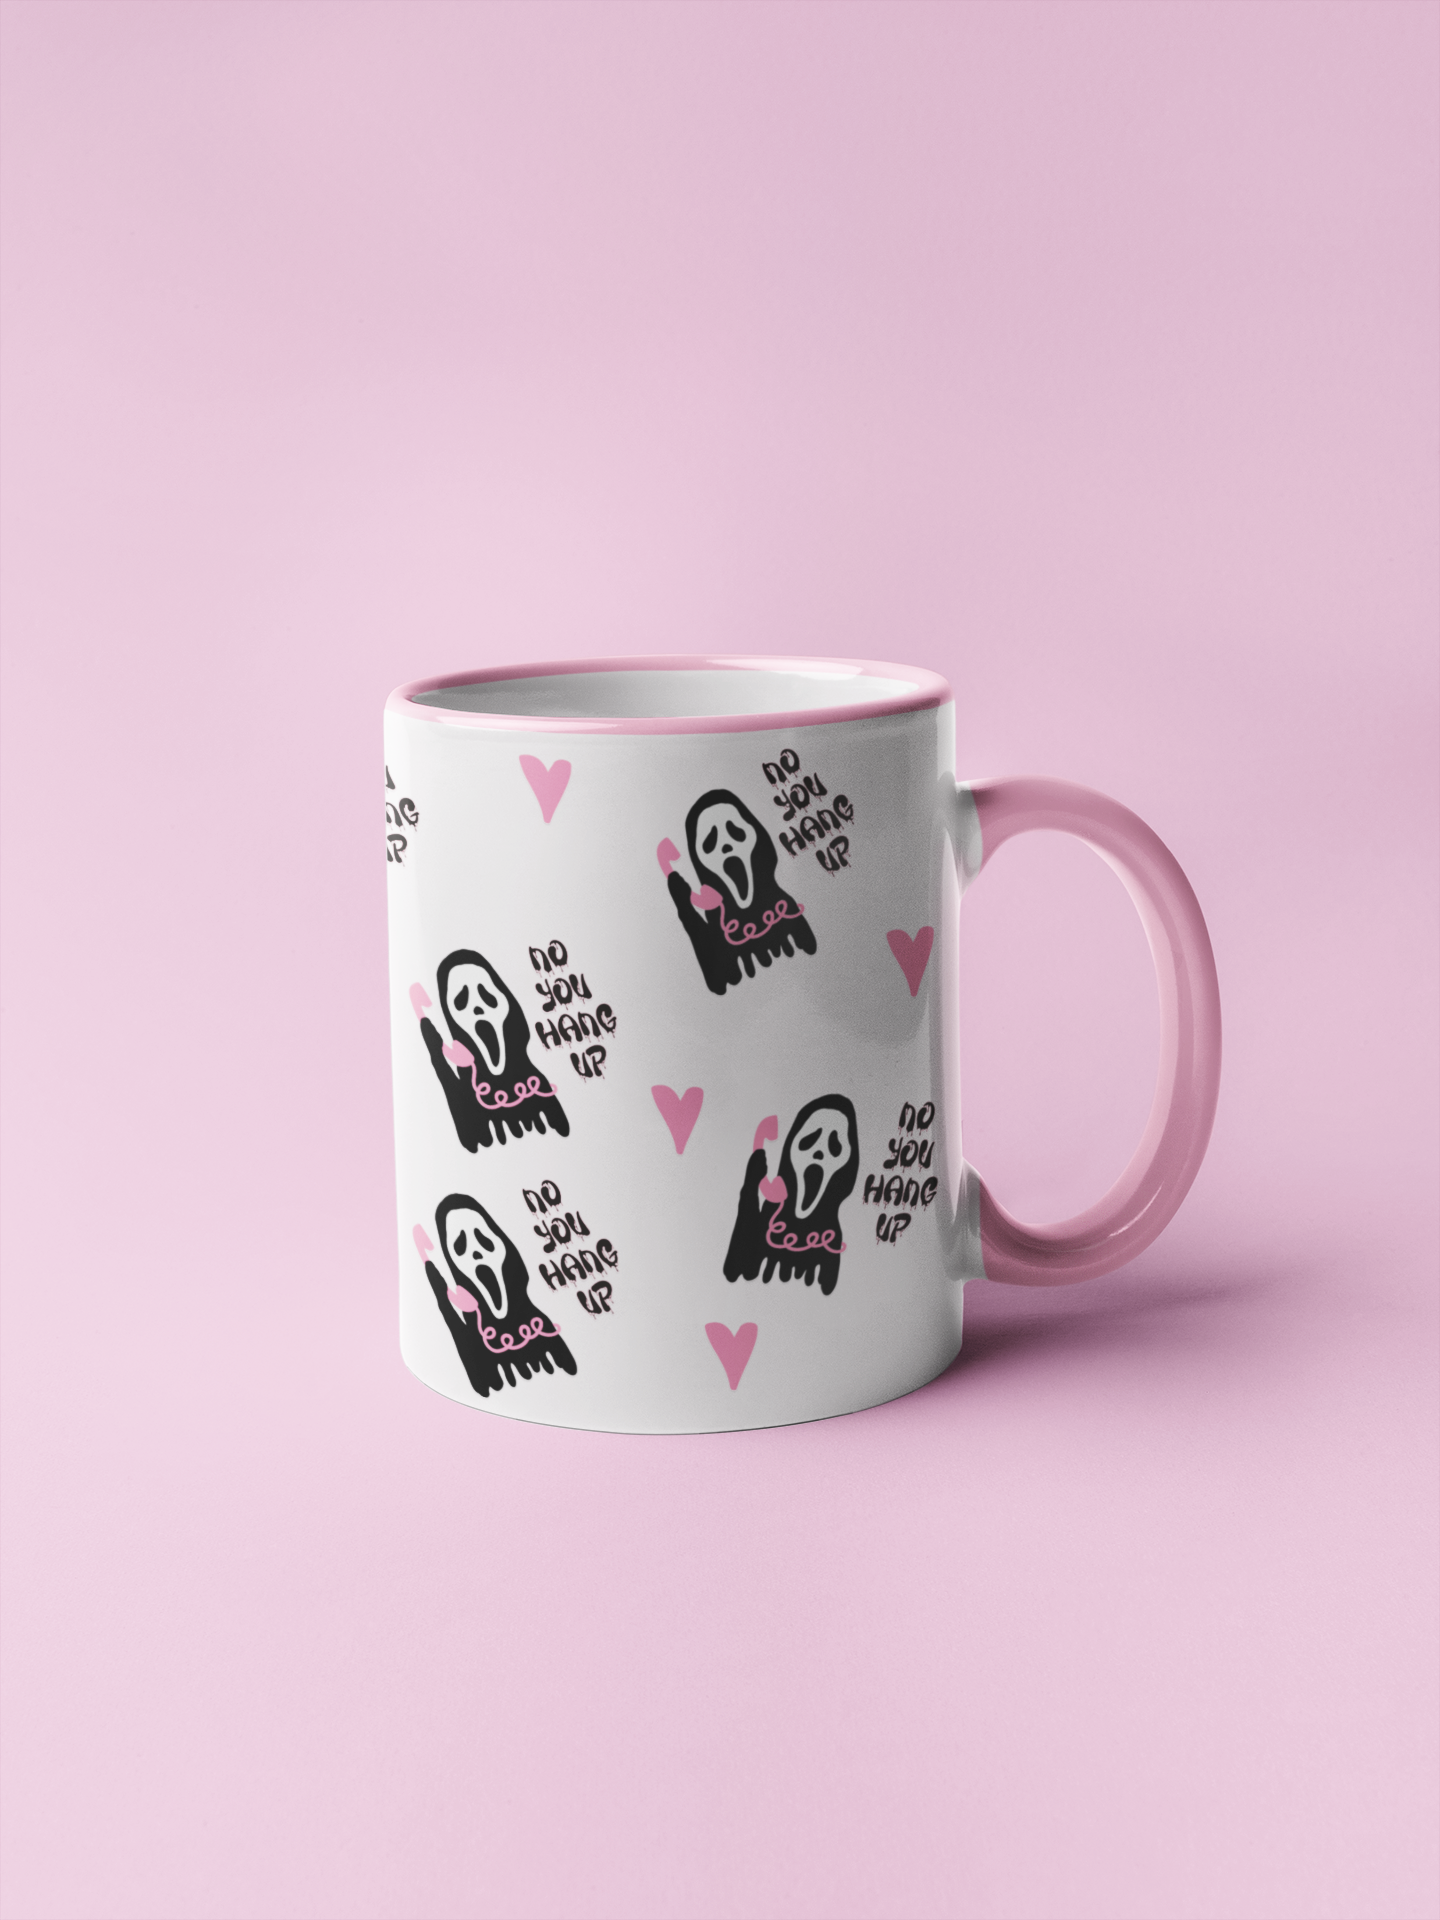 A mug featuring a design taken from the scream film, with the famous mask and quote 'no you hang up'. All in pretty pink and black colours.